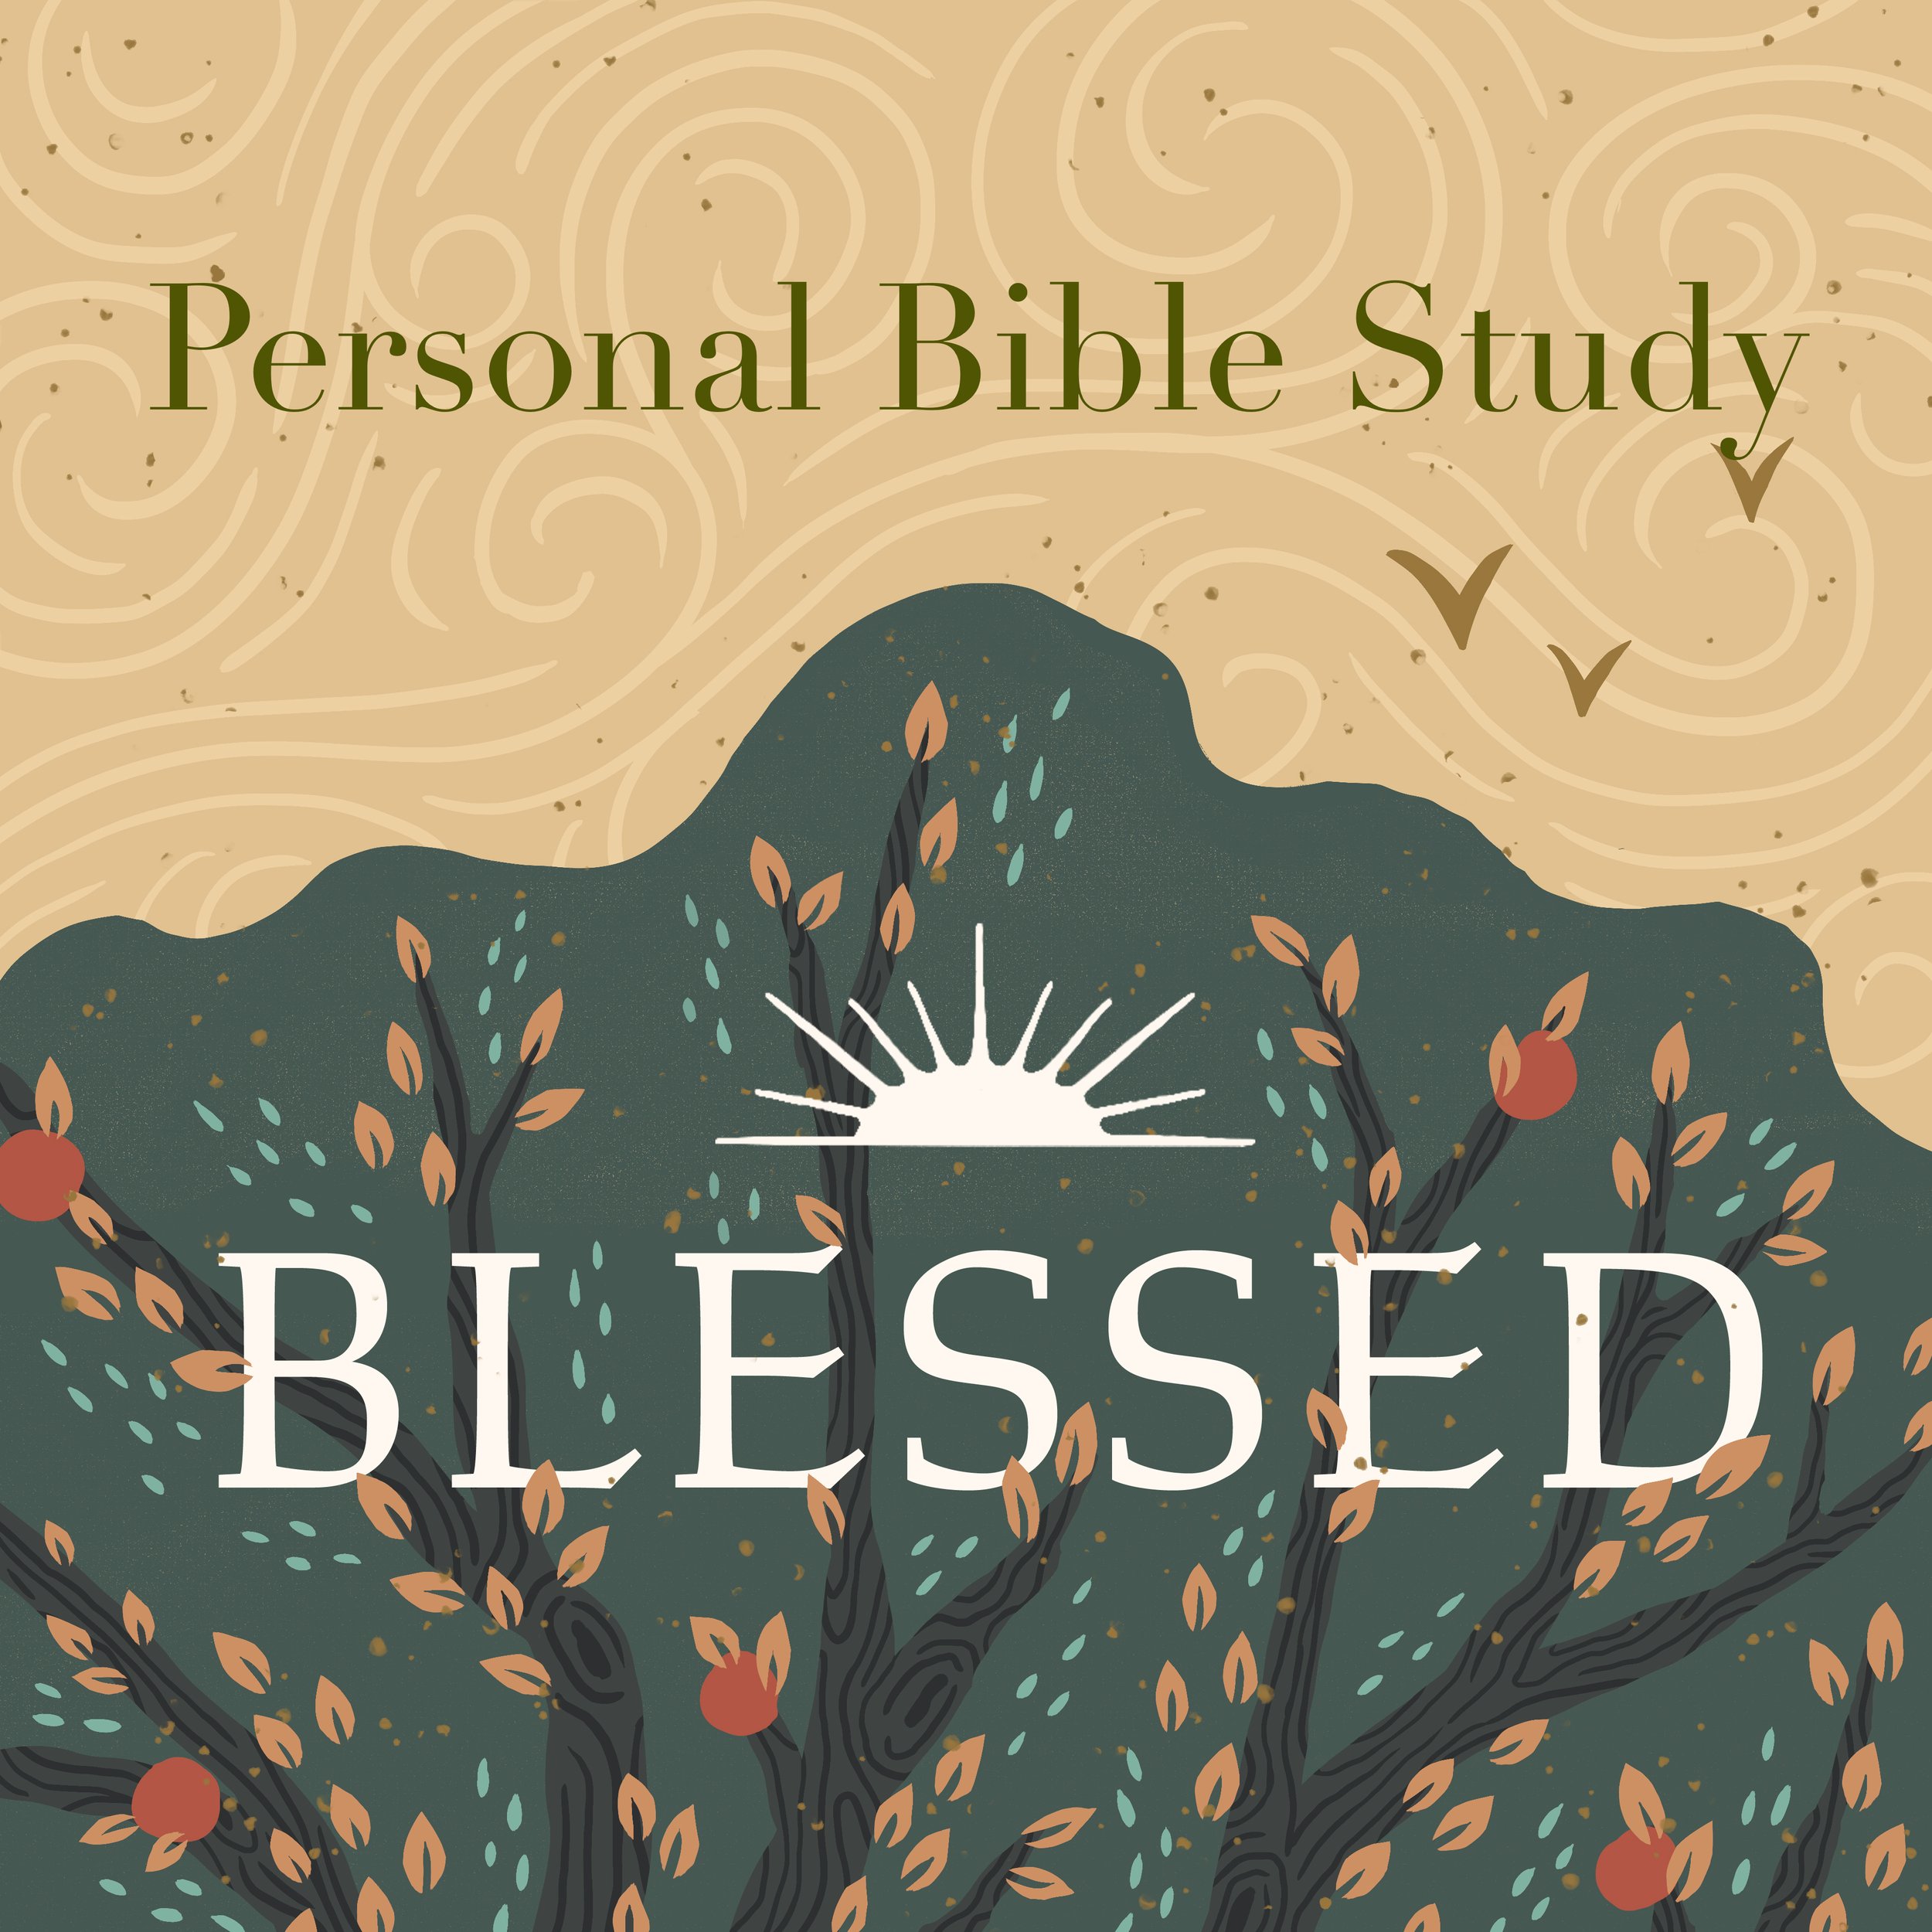 Personal Bible Study cover.jpg